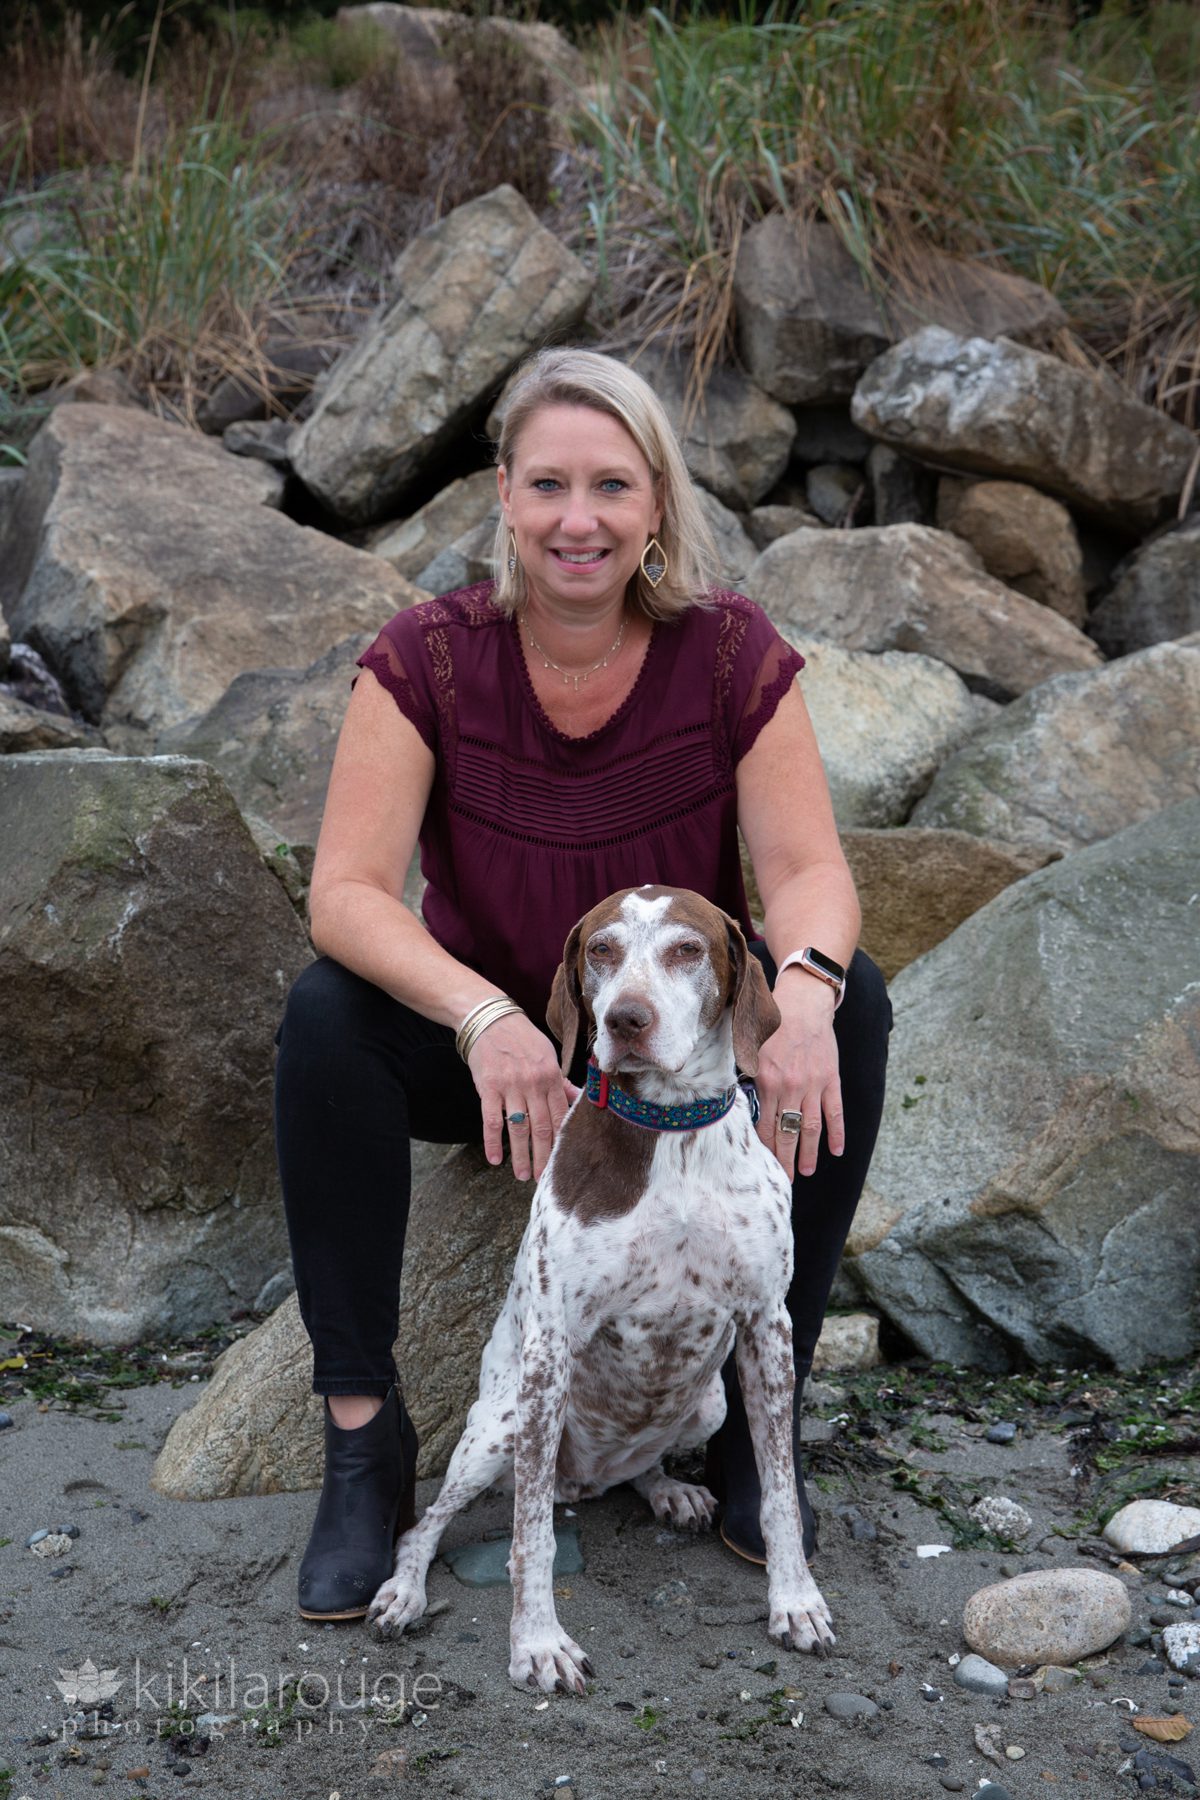 Blonde woman in maroon top with black denim with her dog at beach